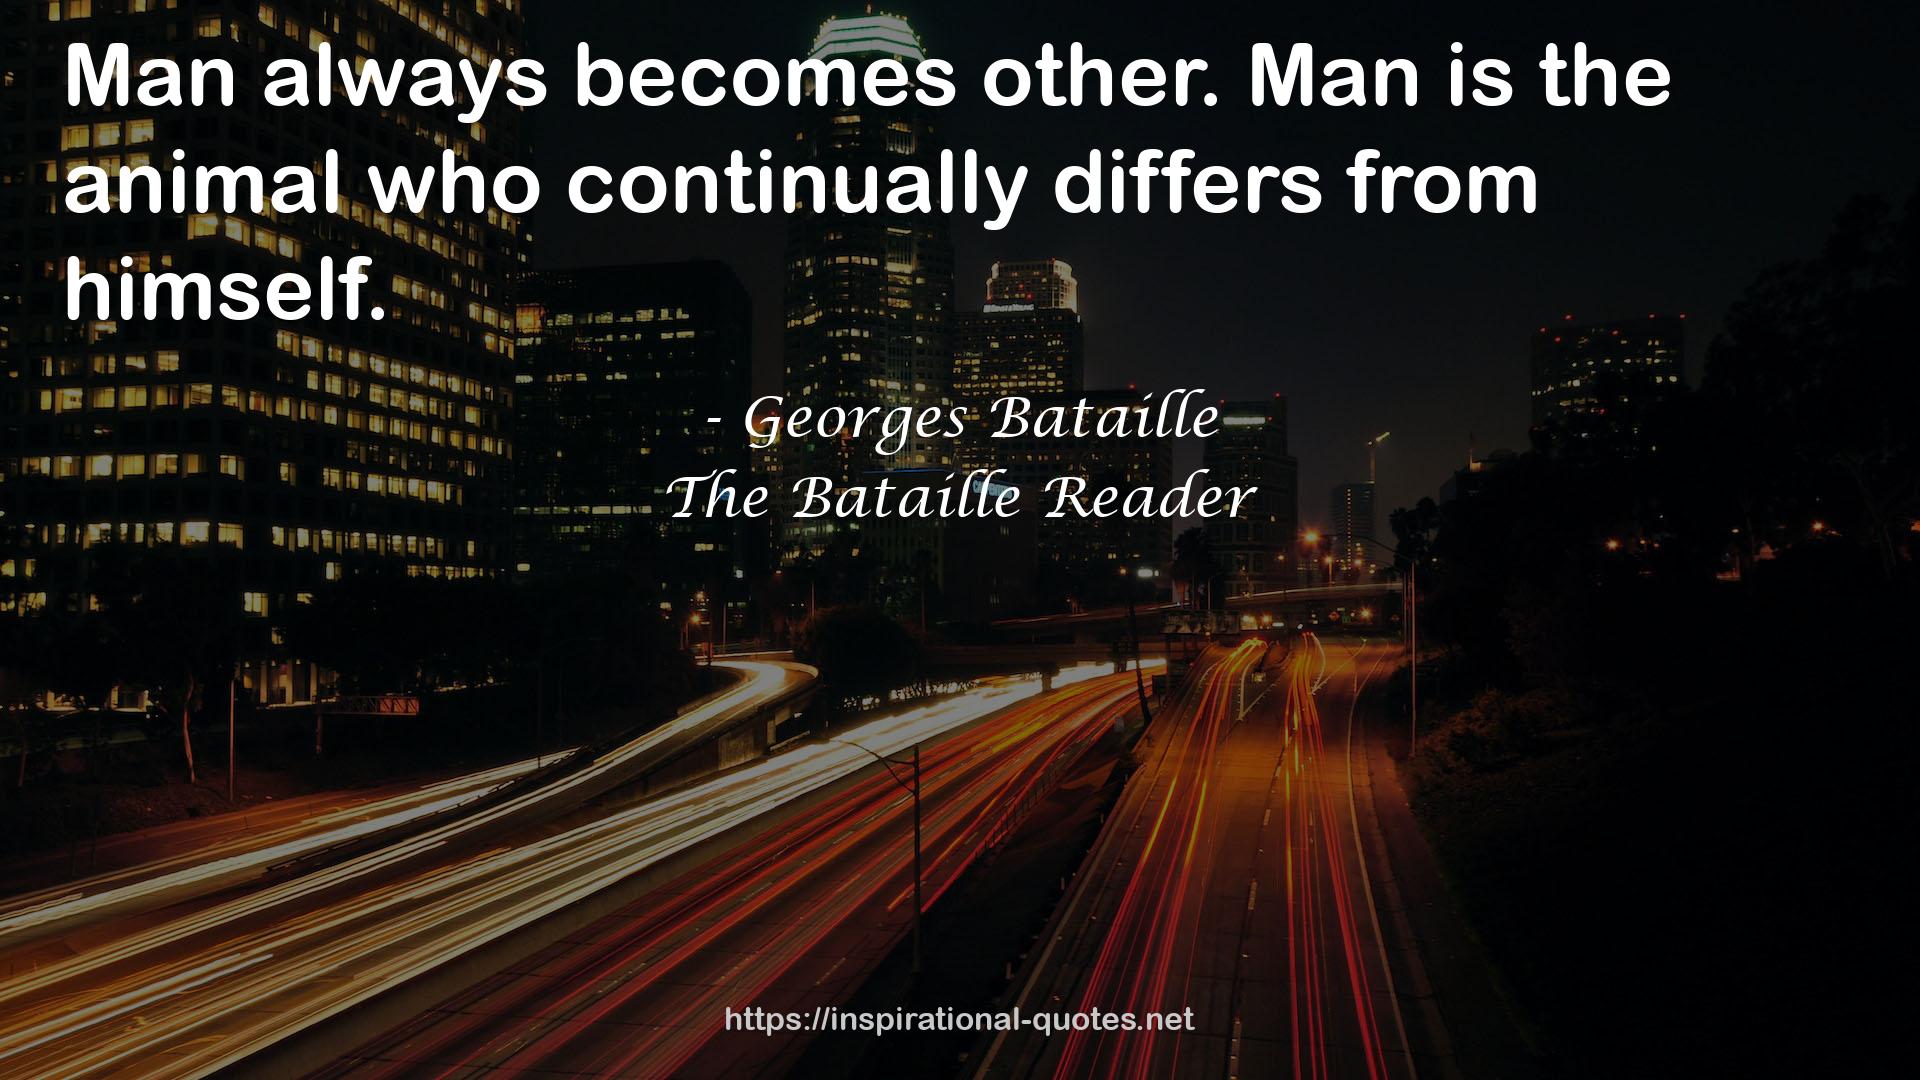 The Bataille Reader QUOTES